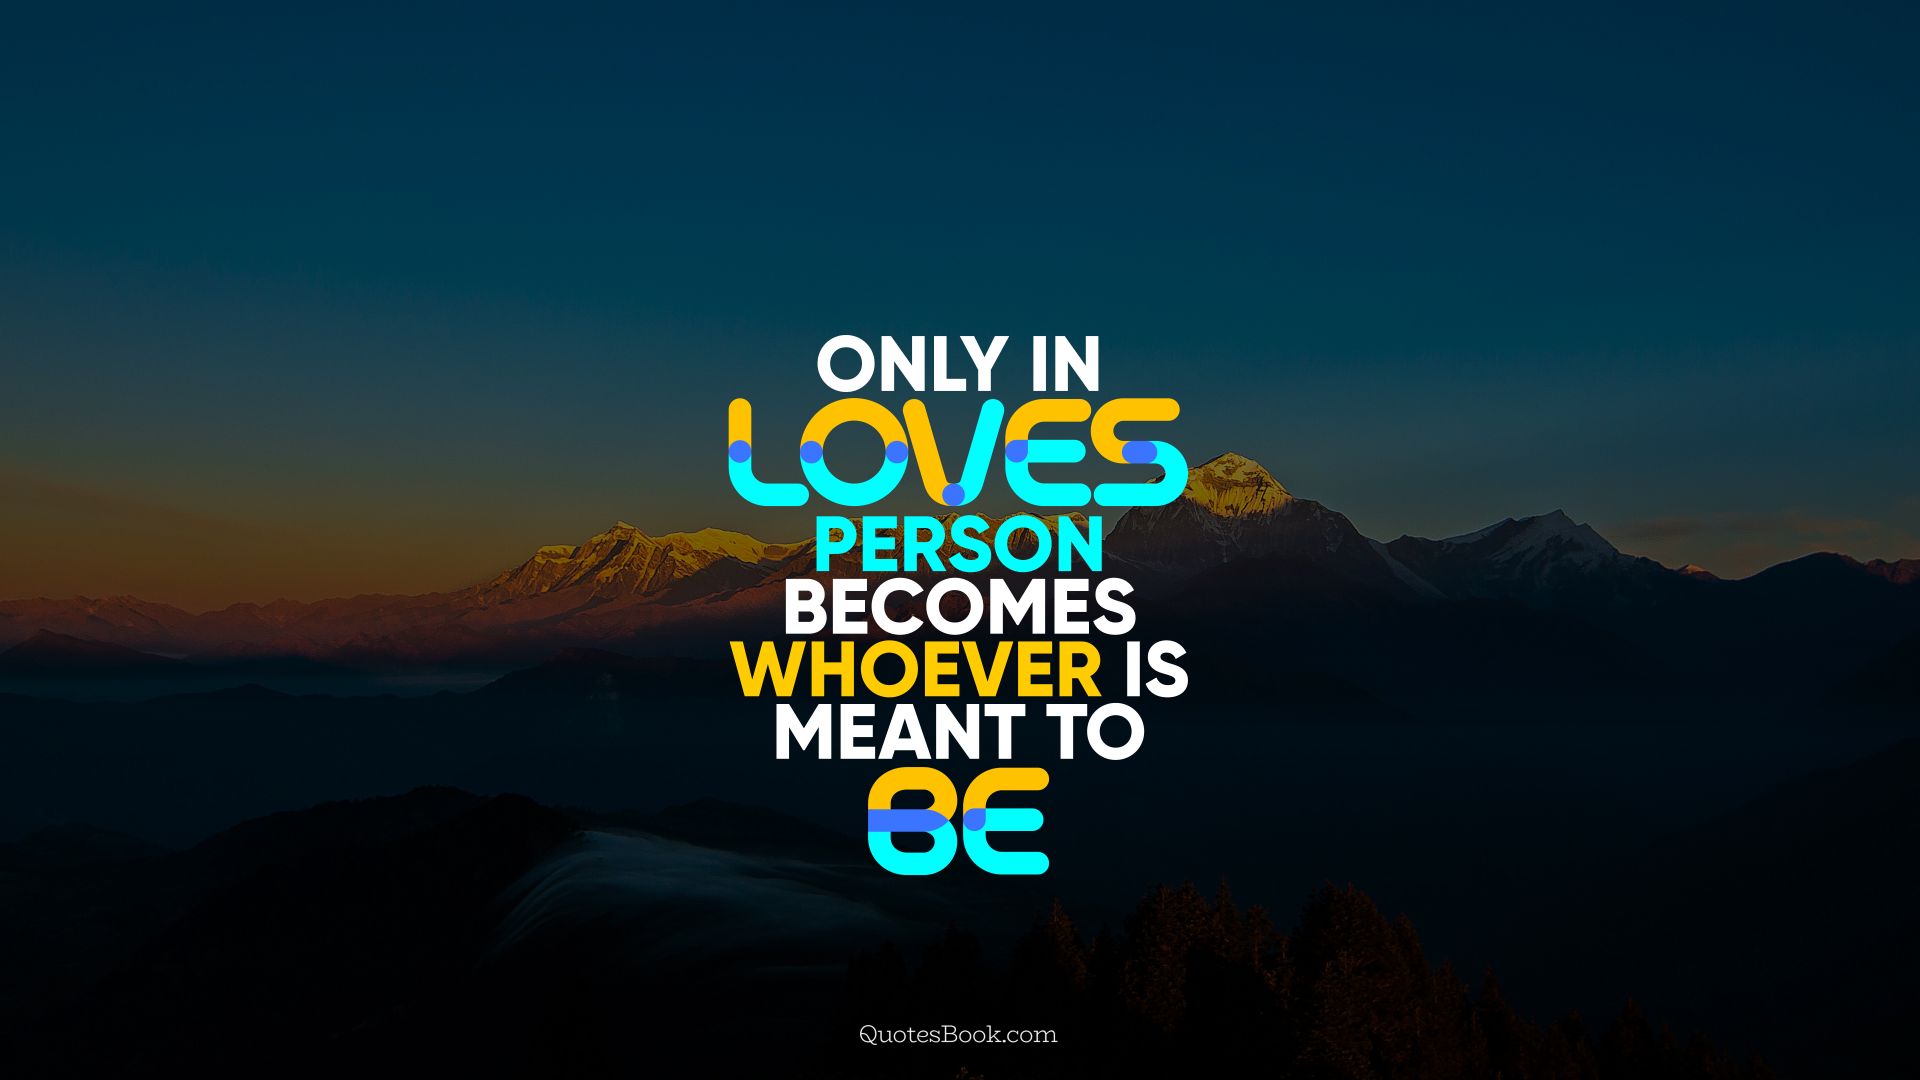 Only in love person becomes whoever is meant to be. - Quote by QuotesBook